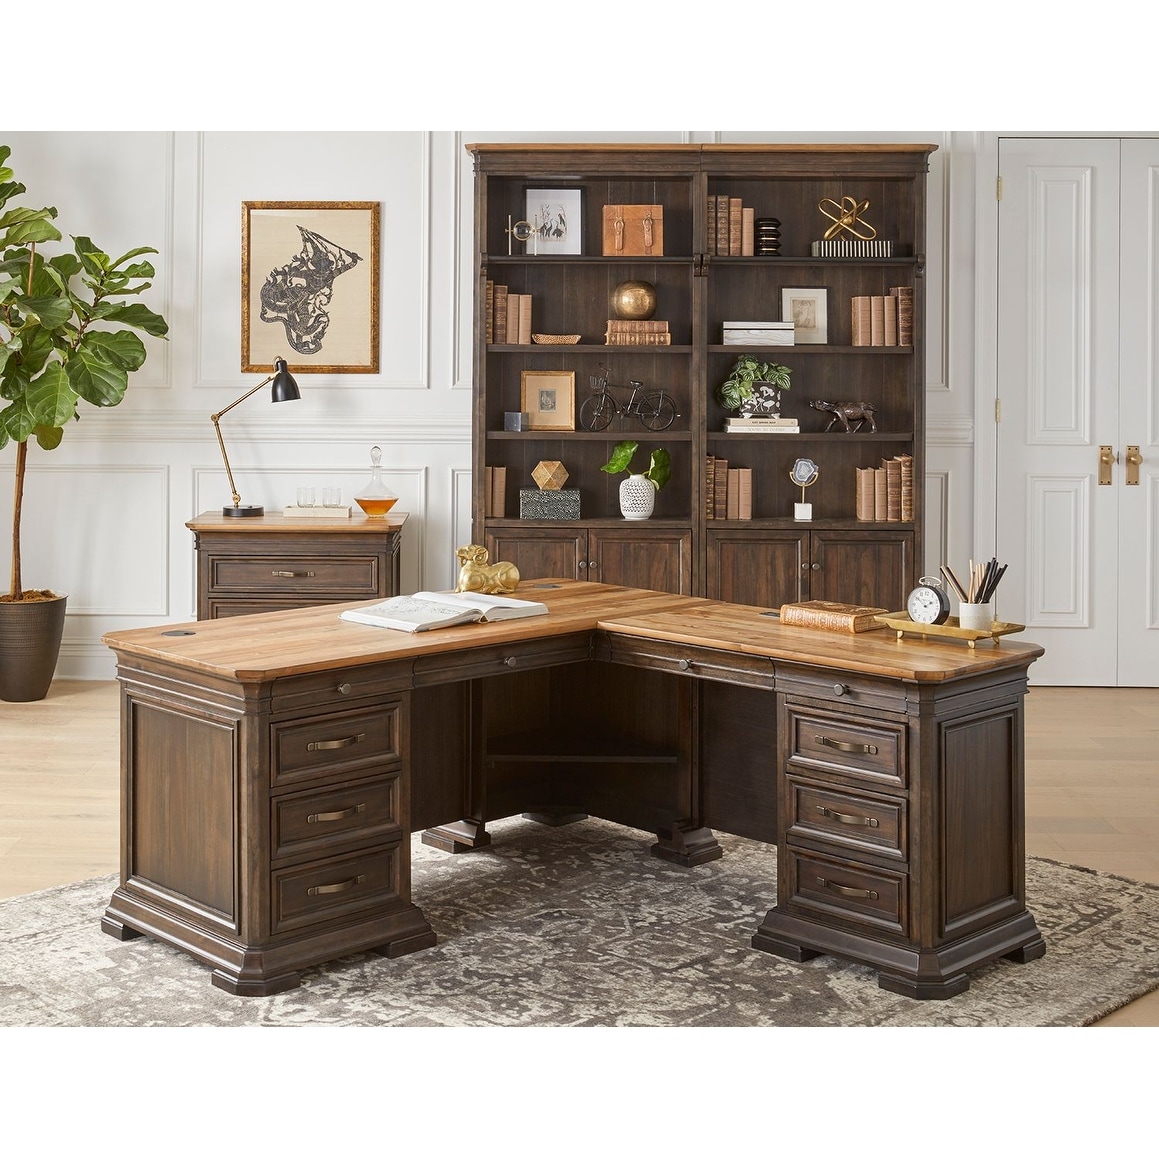 Executve L-Desk & Return With Solid Wood Plank Tops, Brown